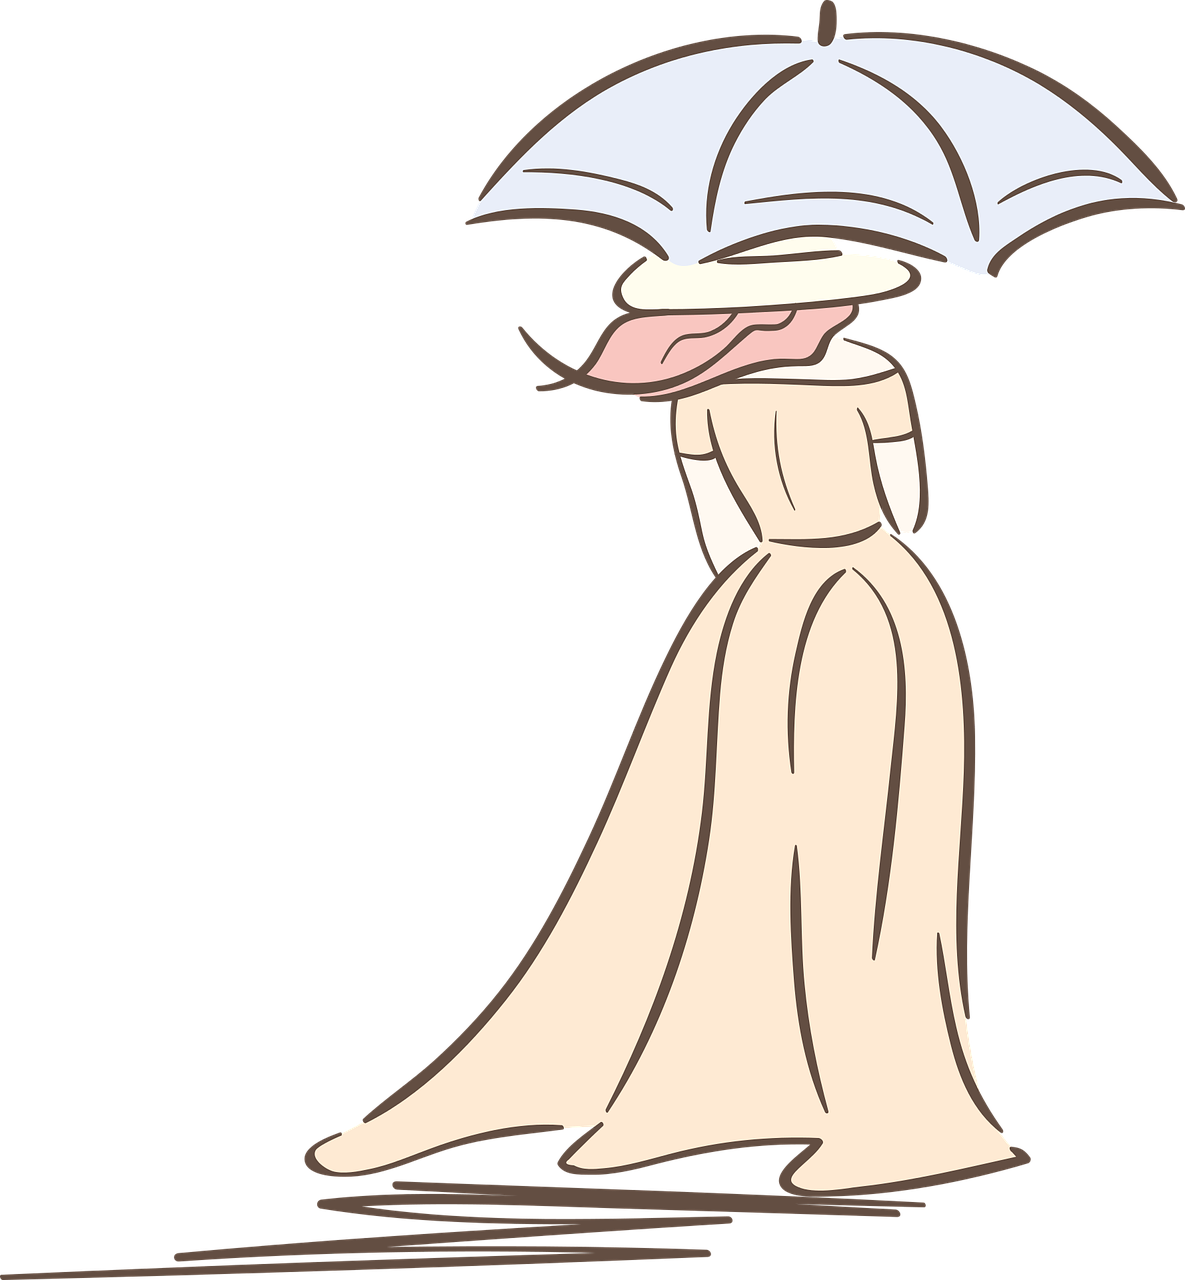 a woman in a white dress holding an umbrella, concept art, inspired by Francis Bourgeois, renaissance, cartoon style illustration, long elegant tail behind, hat covering eyes, full color illustration